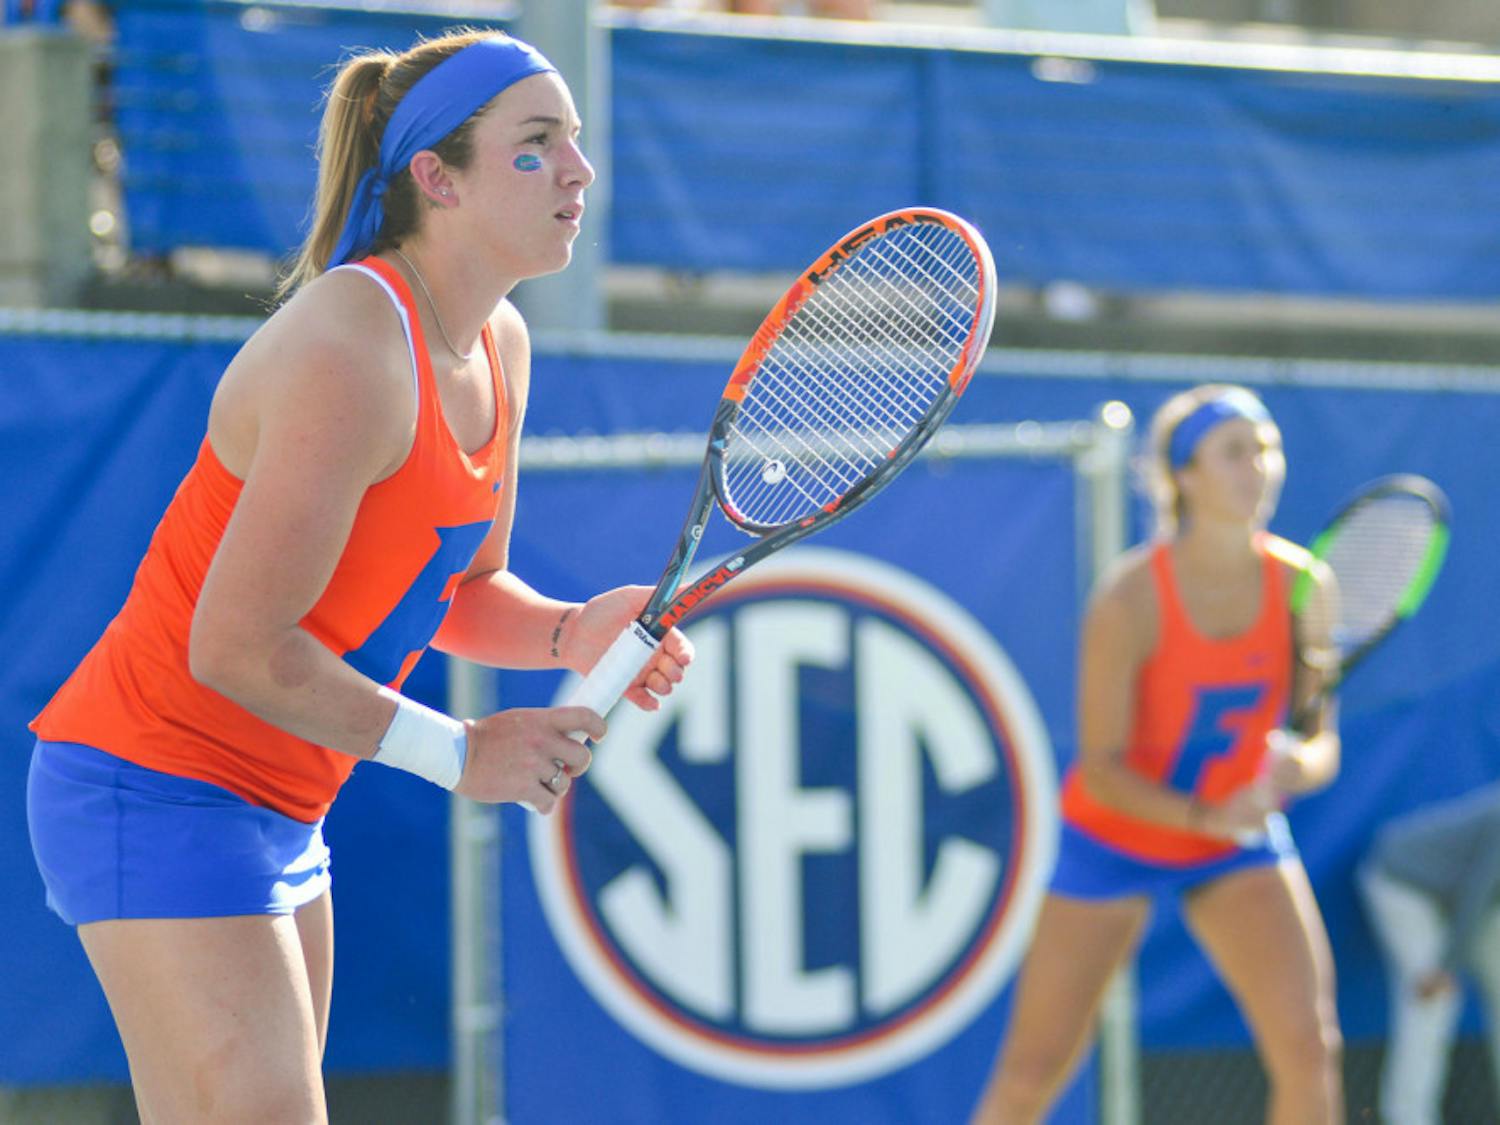 Victoria Emma (pictured) fell to Vanderbilt’s Georgia Drummy 6-0, 6-3 on Sunday in Florida’s 4-3 loss to the Commodores.
&nbsp;